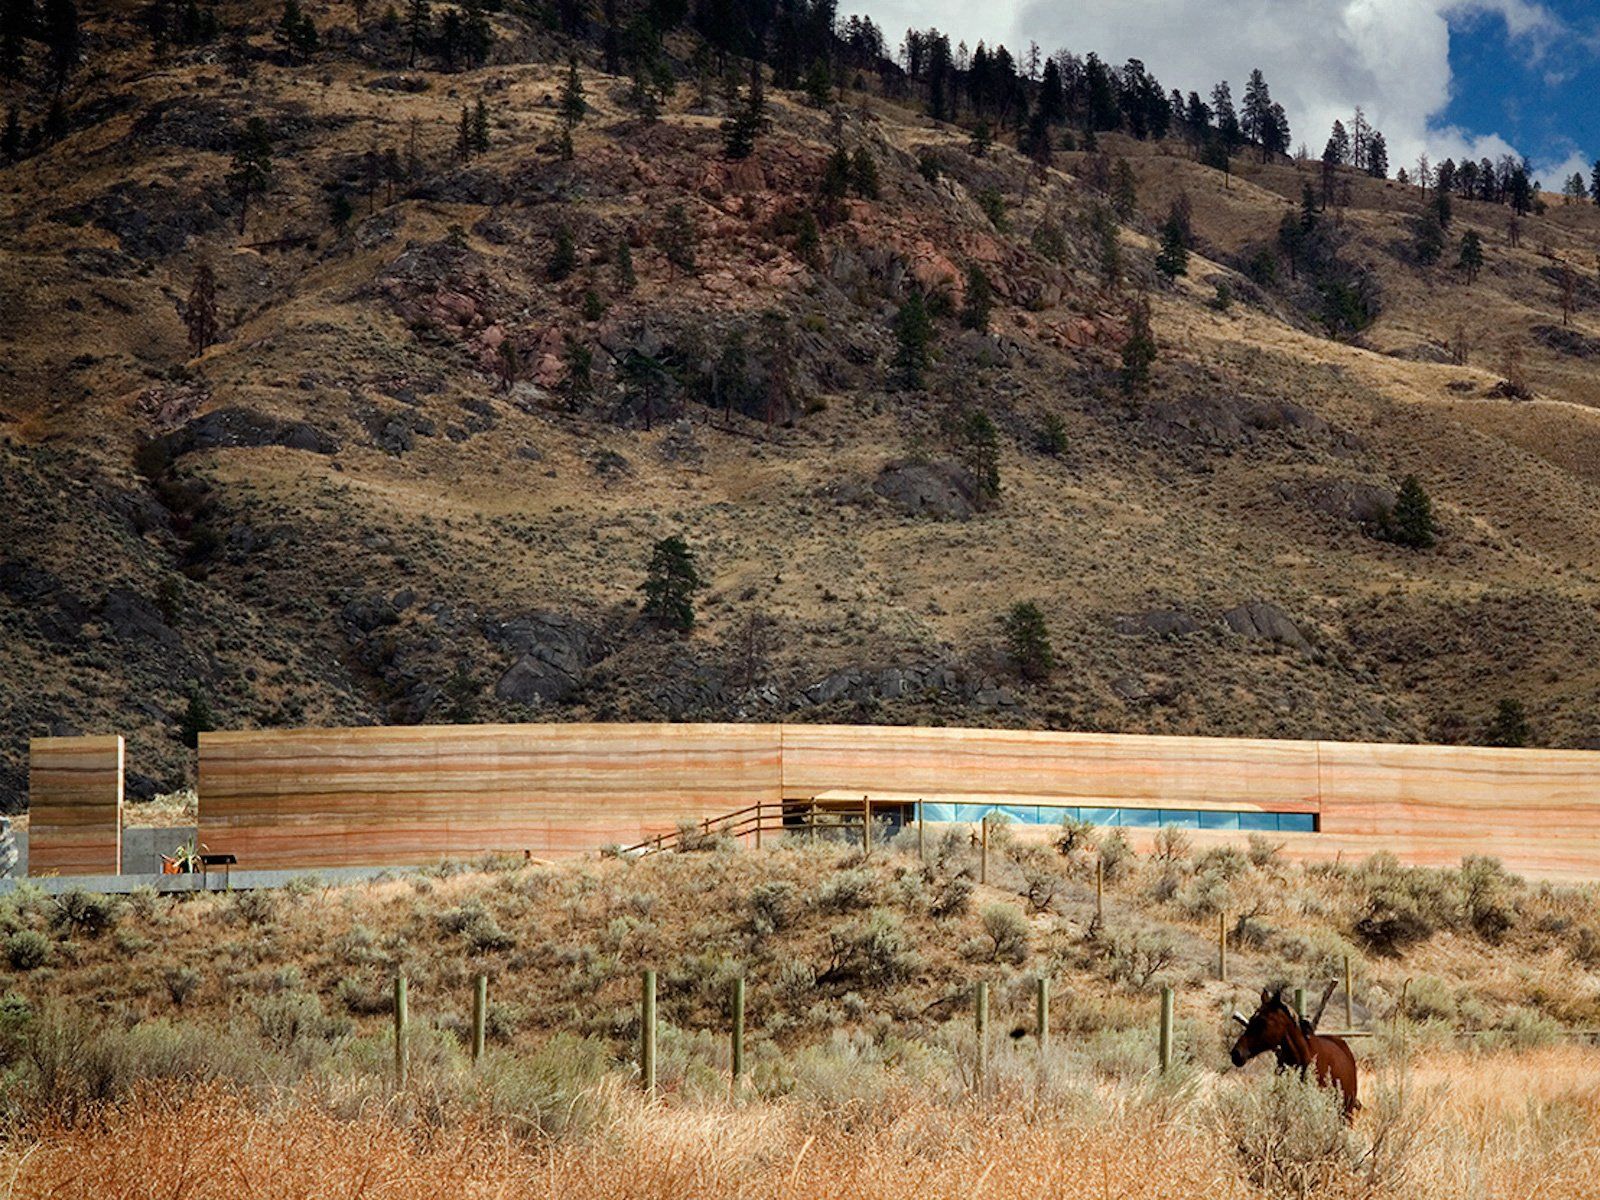 rammed earth SIREWALL building set in the desert with mountains and one horse